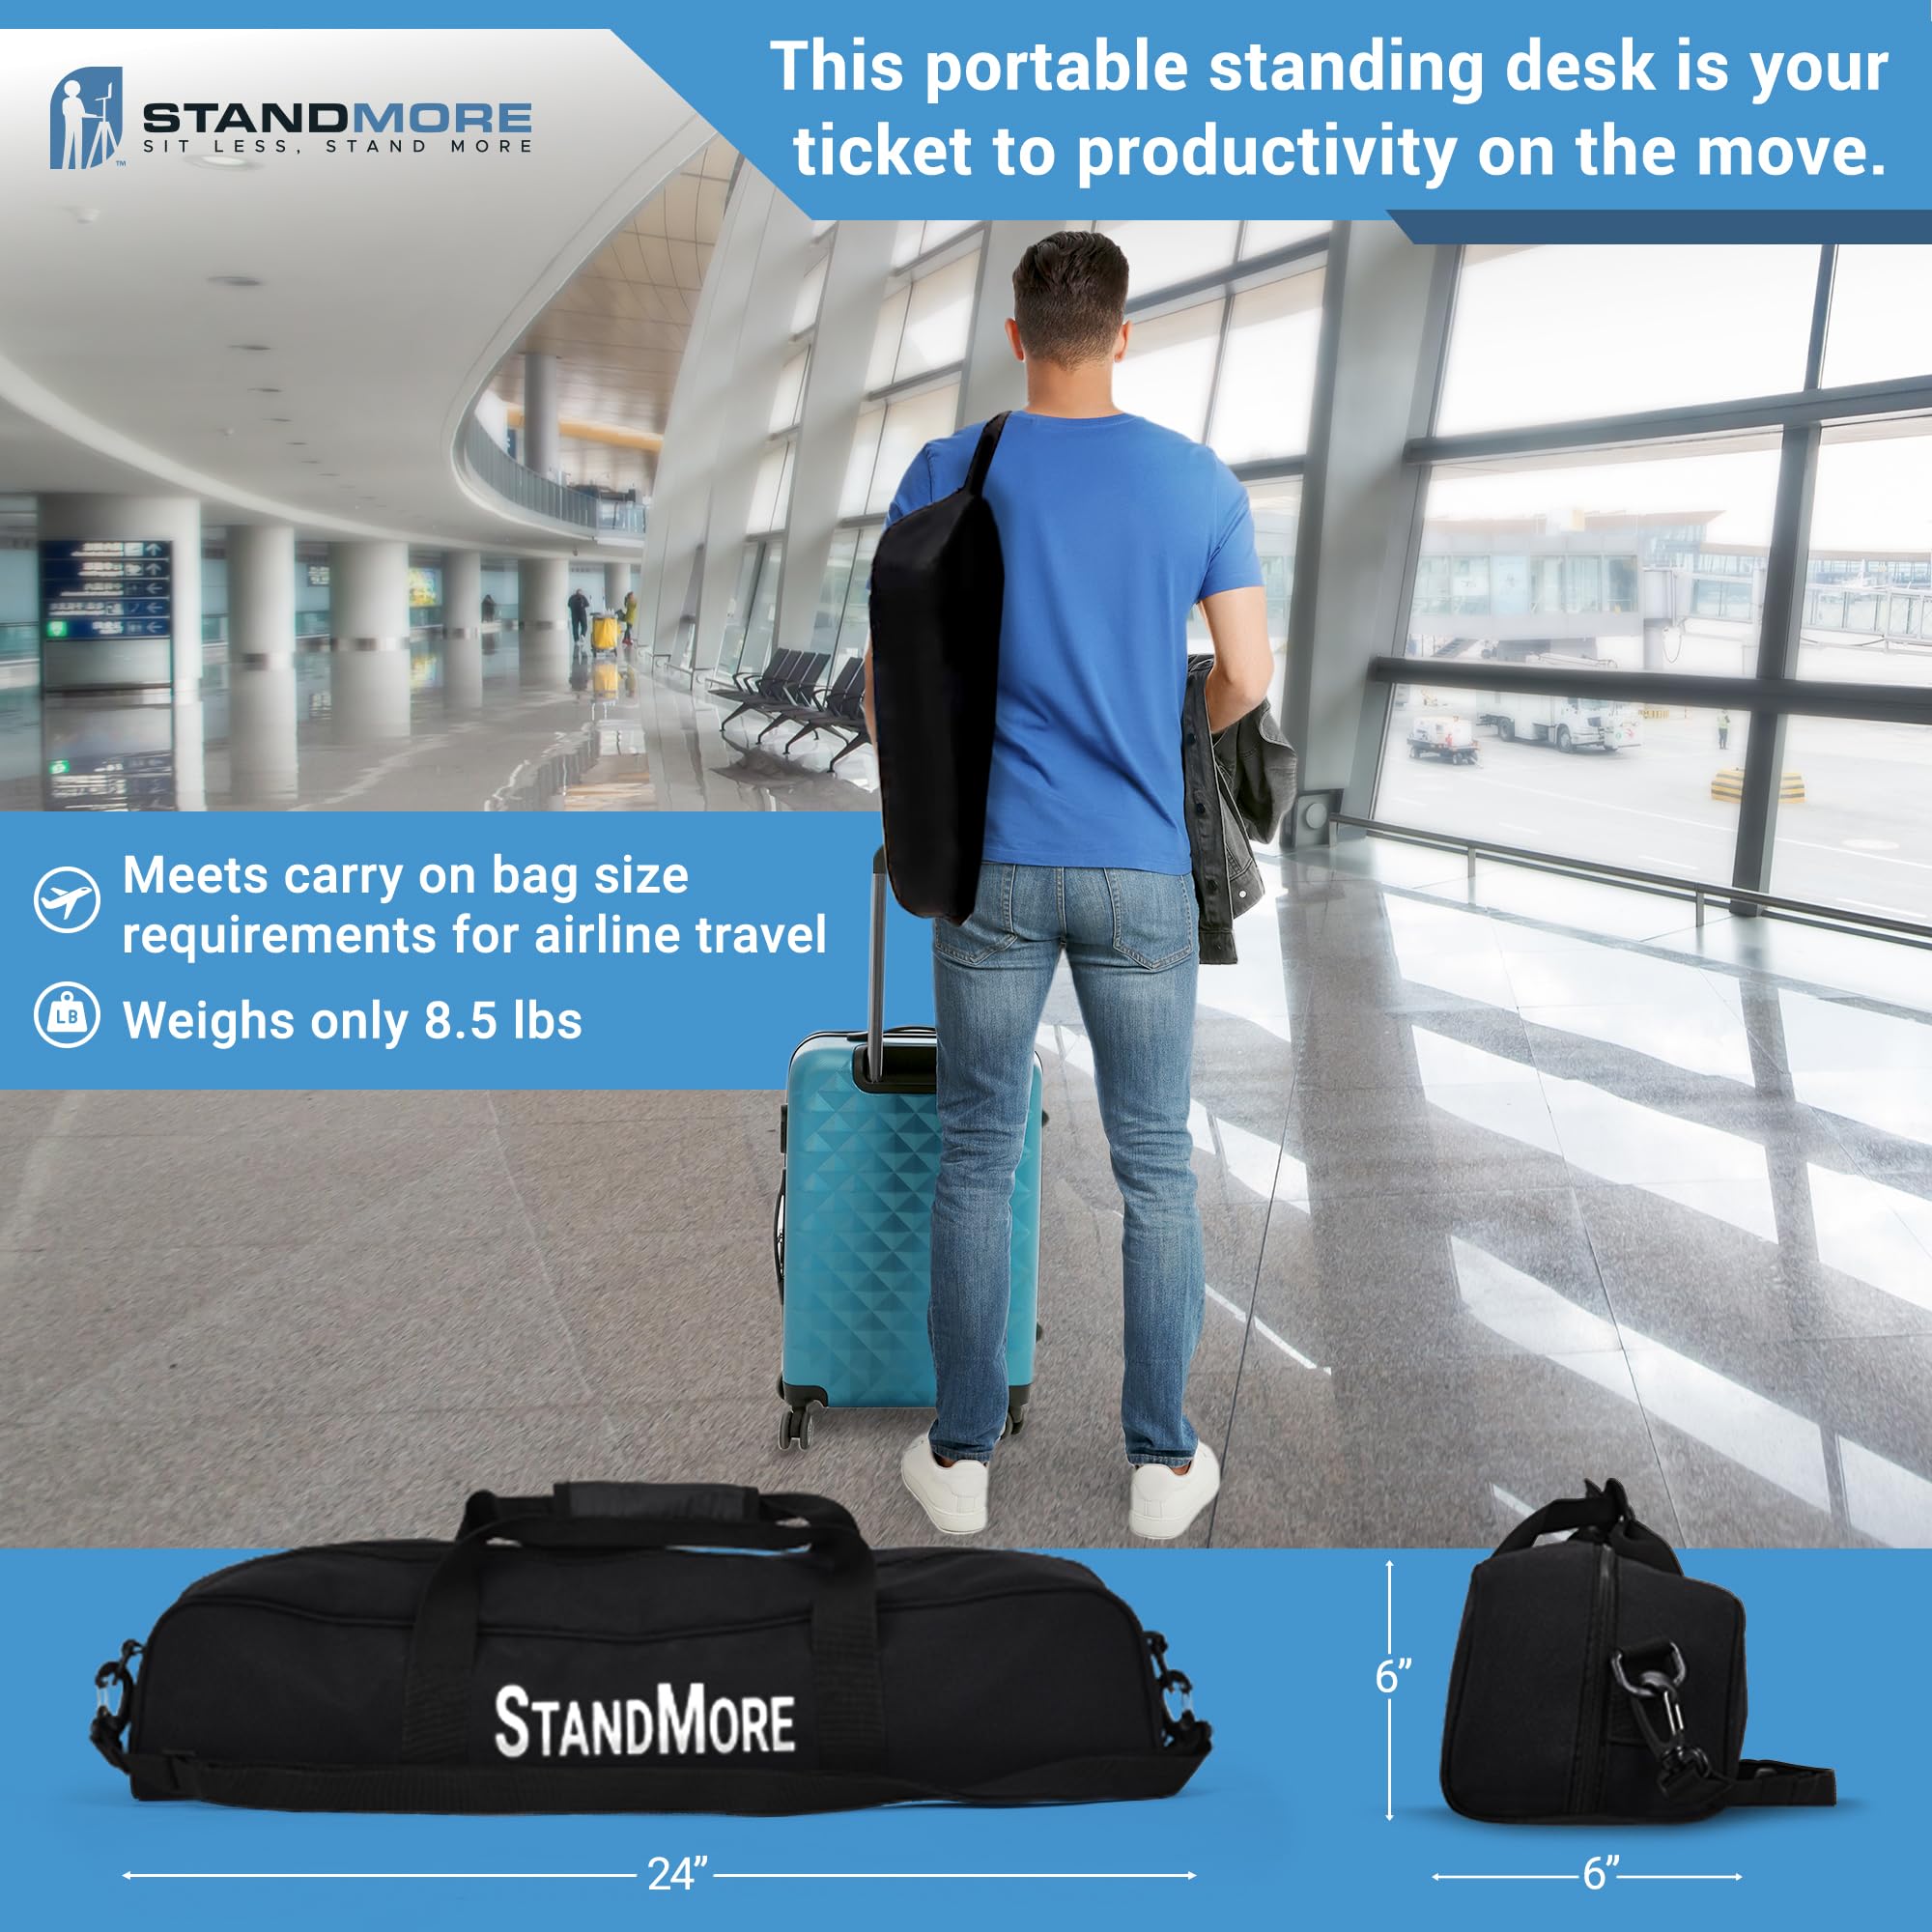 StandMore Portable Standing Desk with Keyboard Tray, Ergonomic Portable Table Height Adjustable Desk with Carrying Bag -Perfect Stand up Desk for Home Office, School - Lightweight Laptop Desk Stand